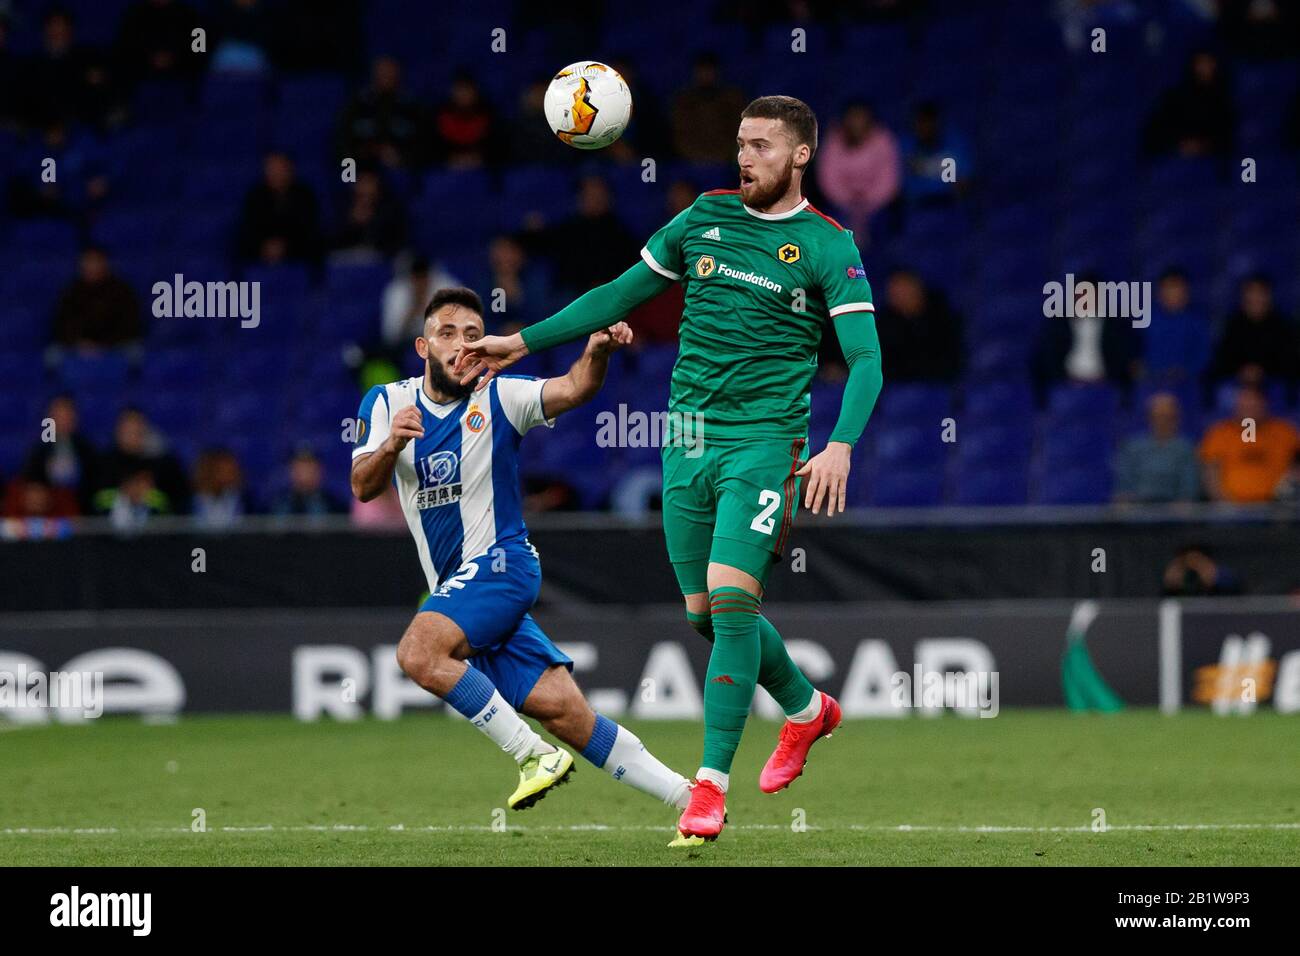 Barcelona, Spain. 27th Feb 2020.  Matt Doherty of Wolverhampton Wanderers F.C. in action with Matias Vargas of RCD Espanyol during the UEFA Europa League round of 32 second leg match between RCD Espanyol and Wolverhampton Wanderers at RCD Stadium on February 27, 2020 in Barcelona, Spain. Credit: Dax Images/Alamy Live News Stock Photo